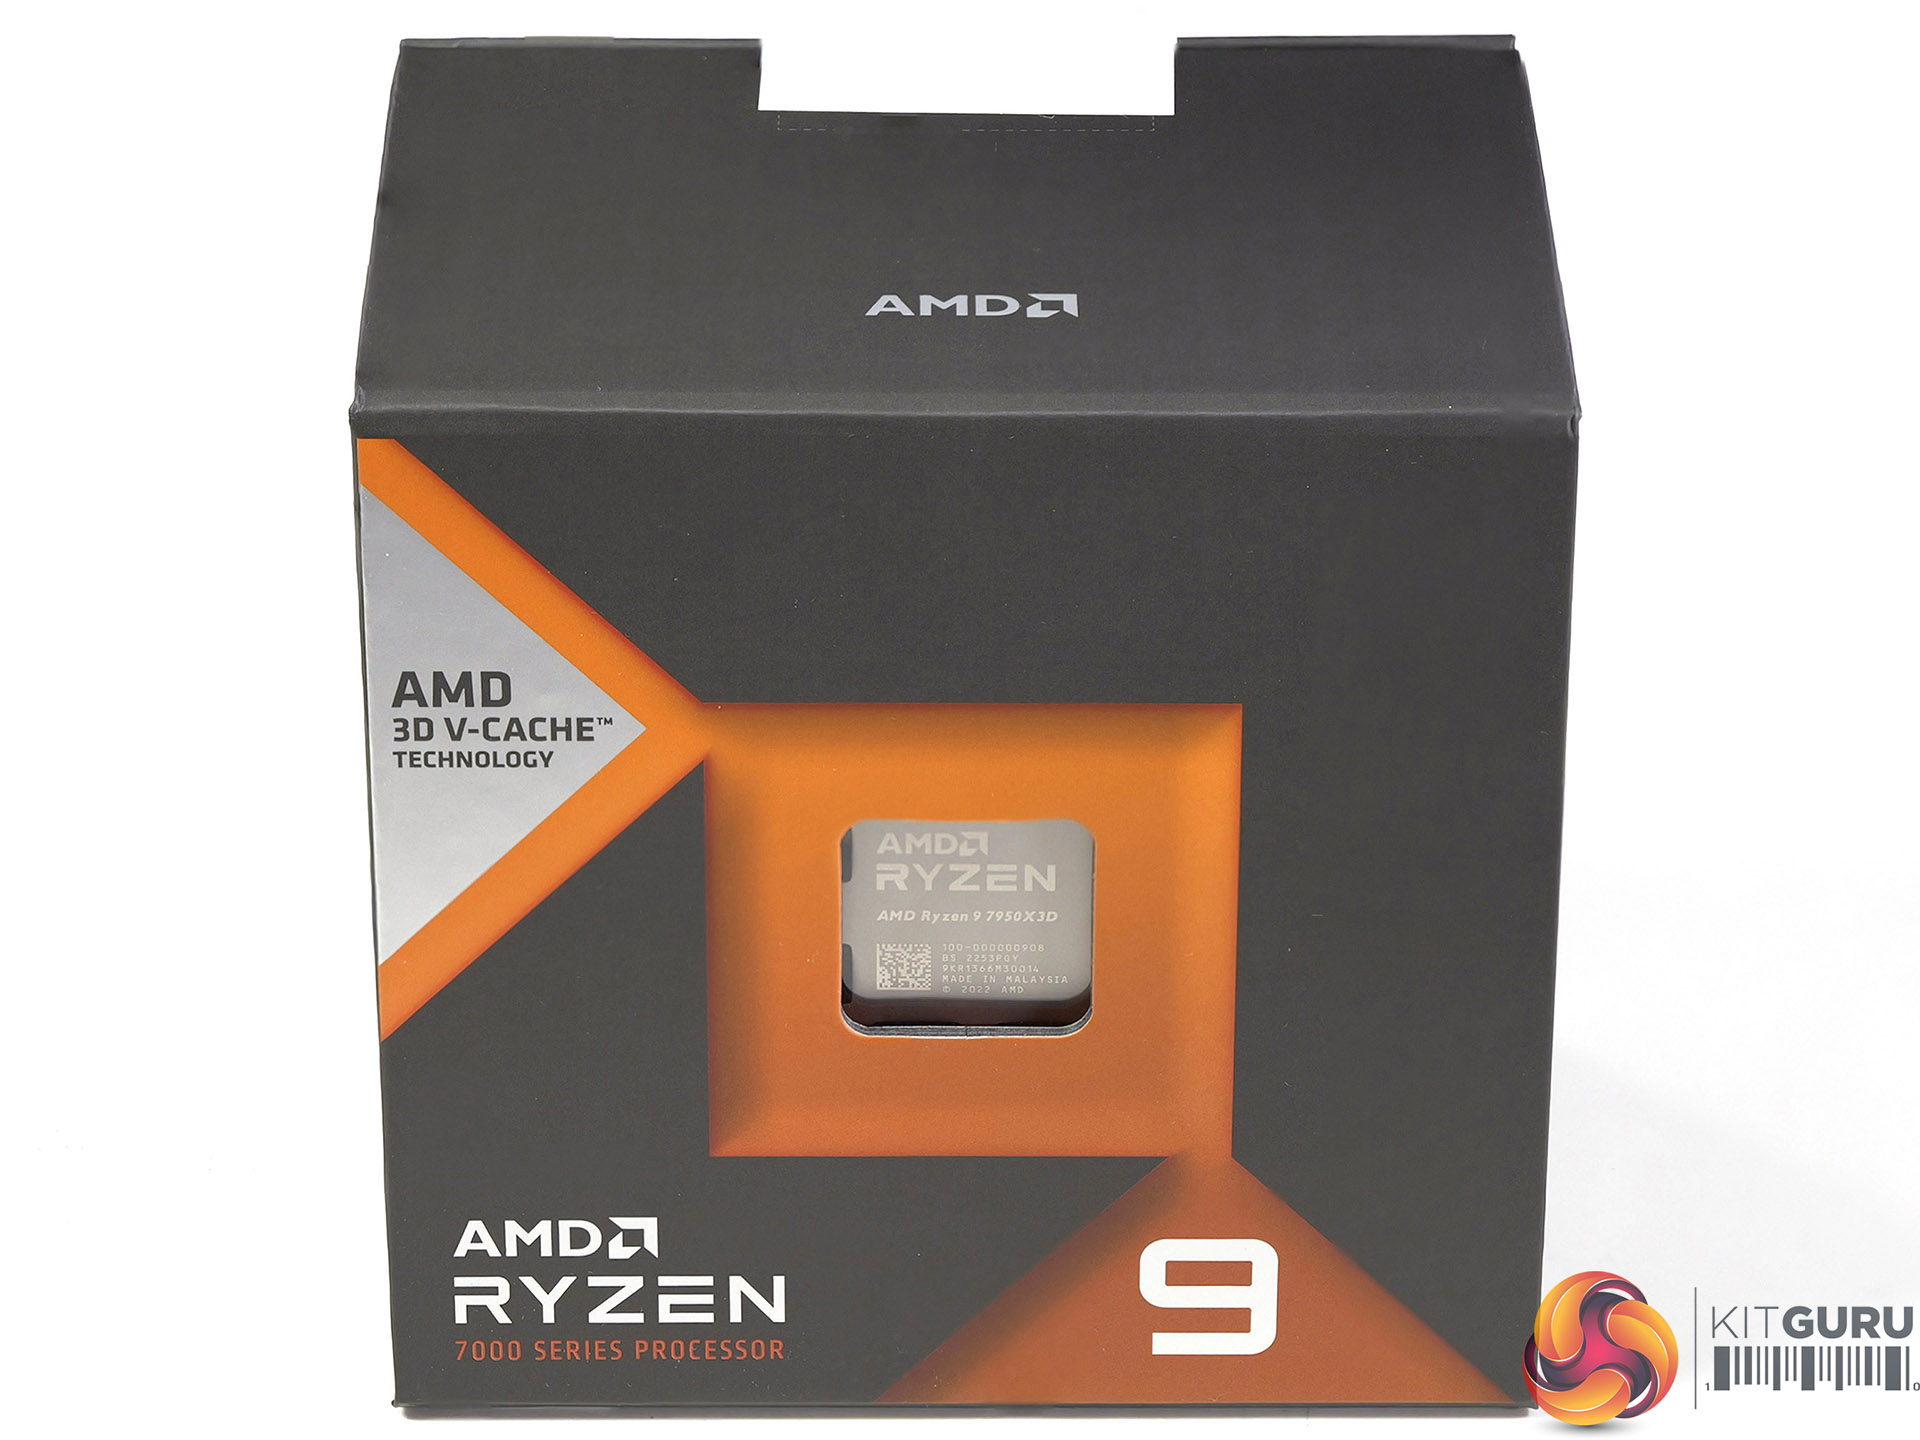 Developpers, Creators and 3D Artists! Should You Go for Ryzen 9 7950x3D or  7950x non 3D? - OSHKO